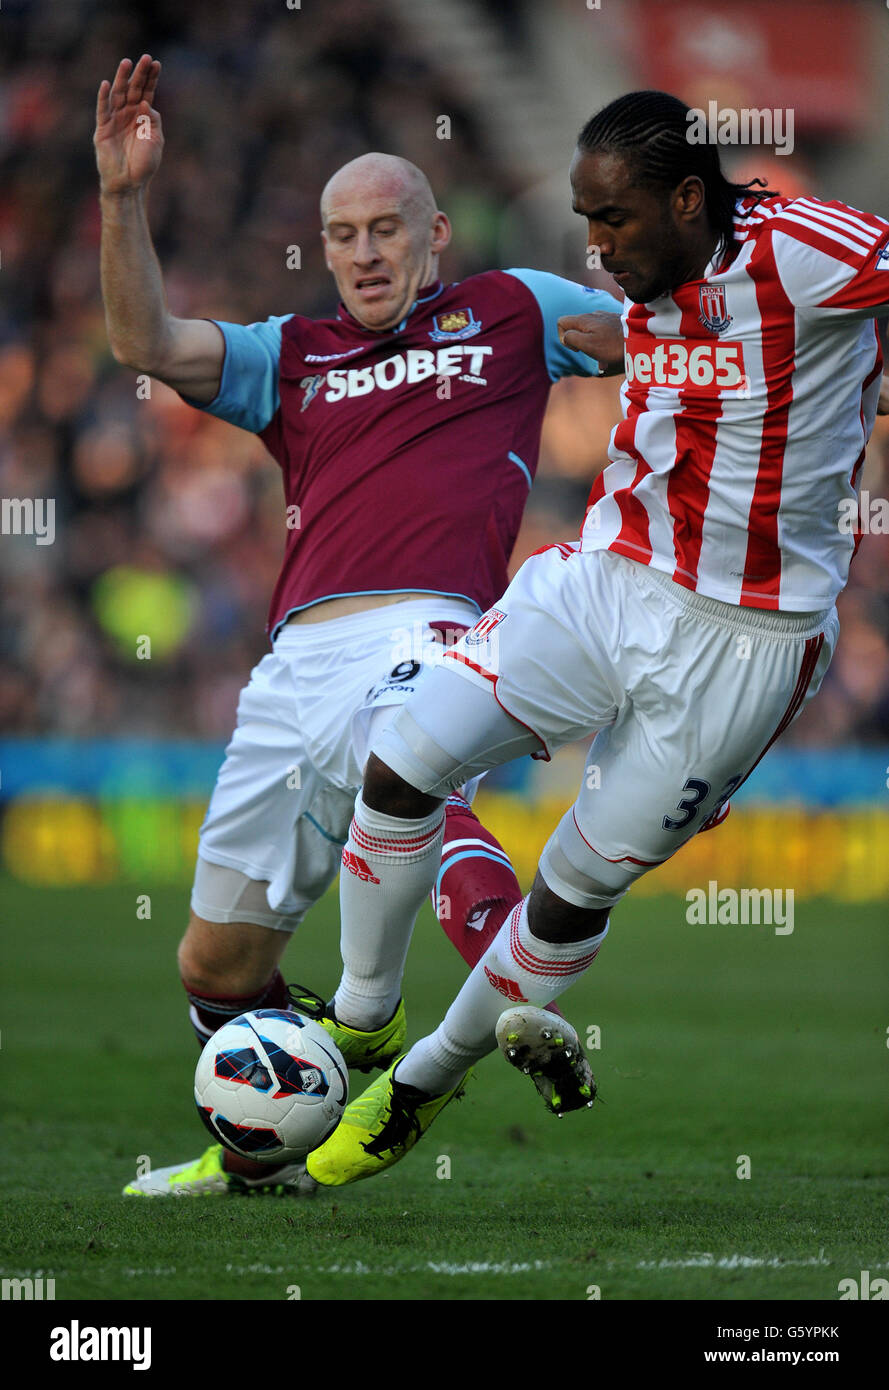 Stoke City's Cameron Jerome is fouled by West Ham United's James Collins during the Barclays Premier League match at the Britannia Stadium, Stoke. Stock Photo